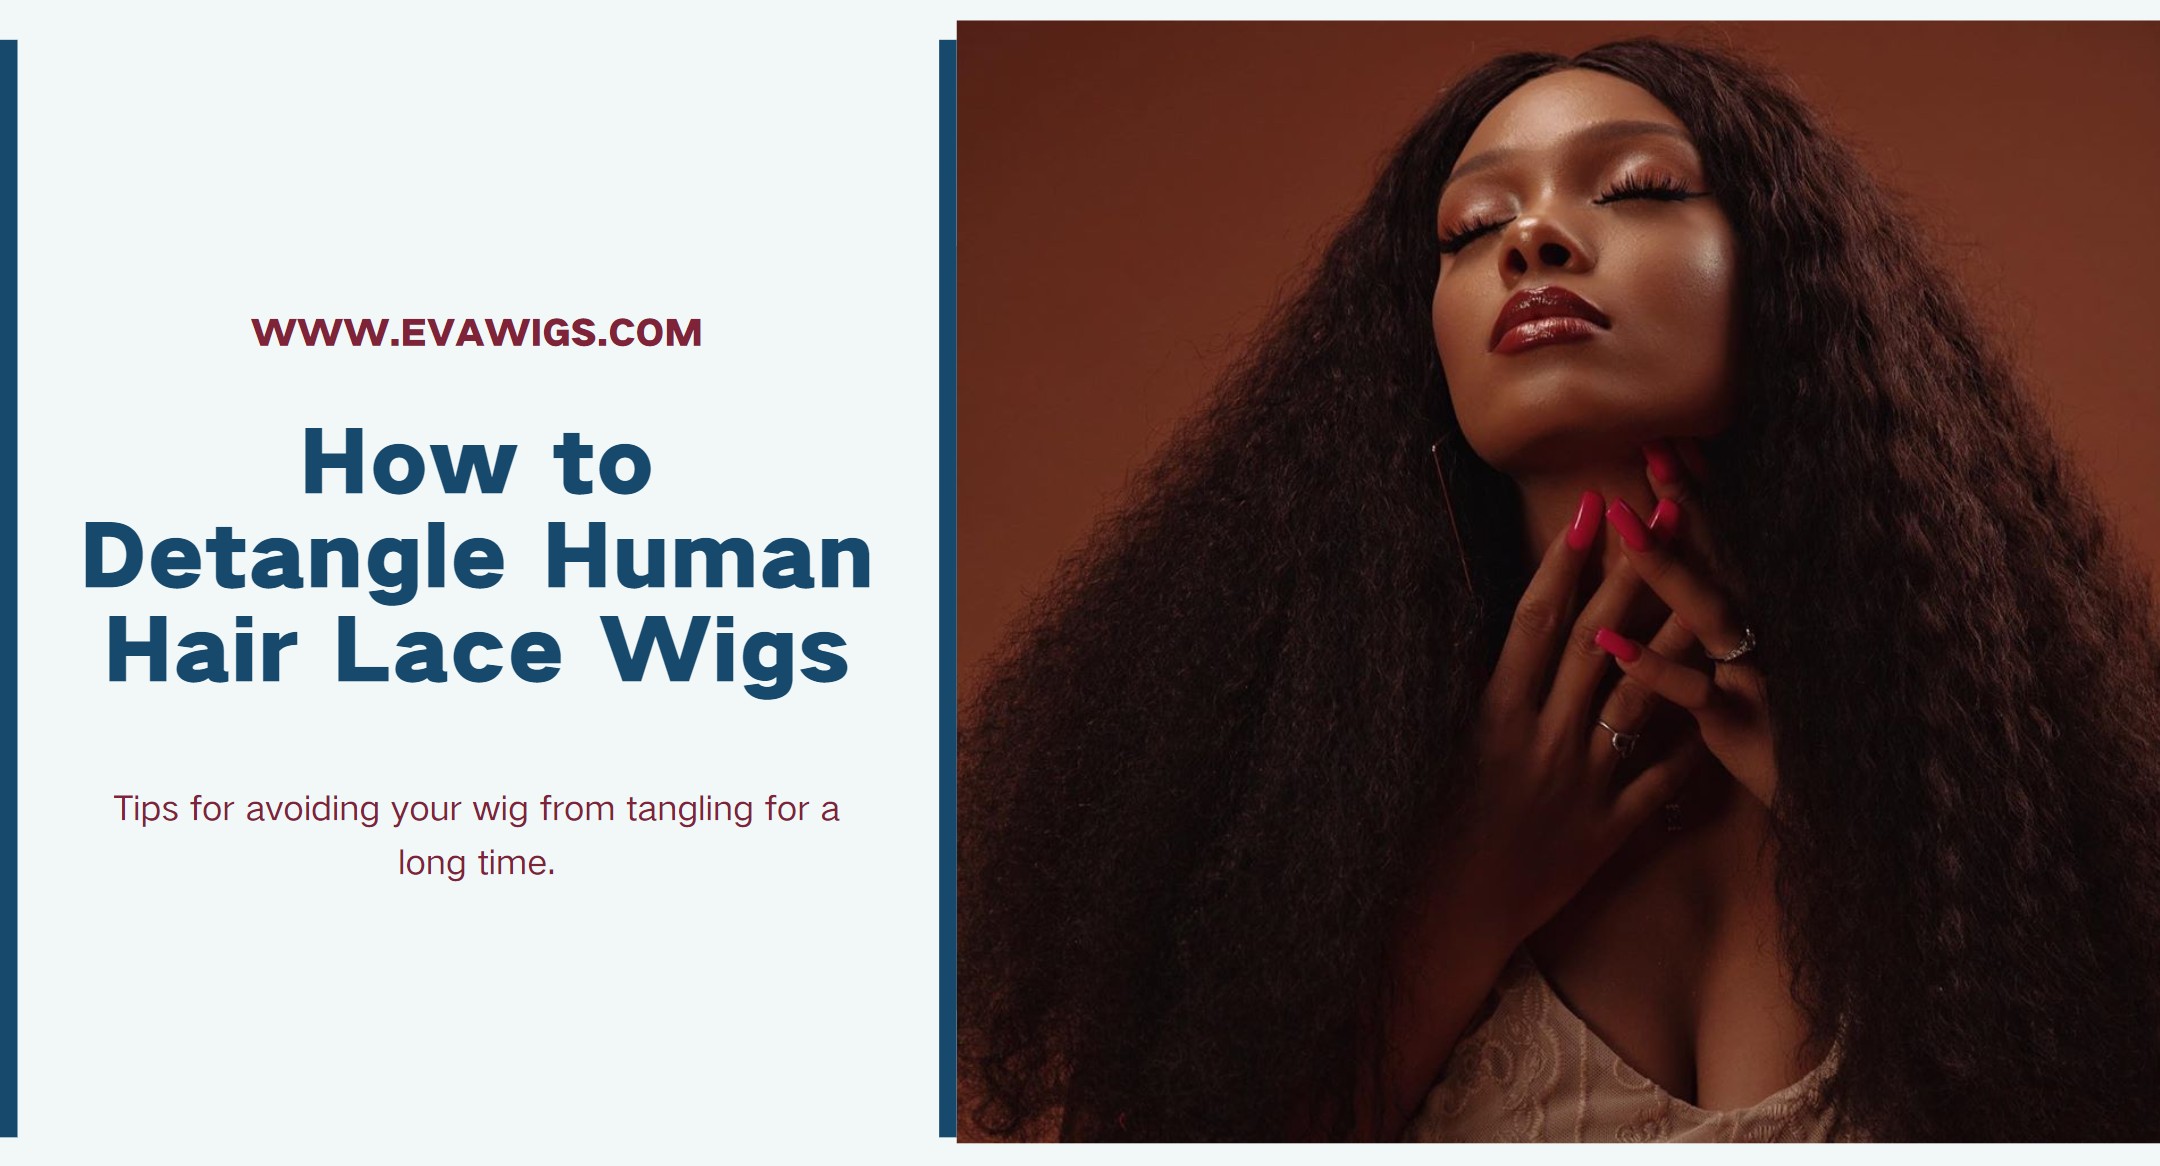 How to Detangle Human Hair Lace Wigs